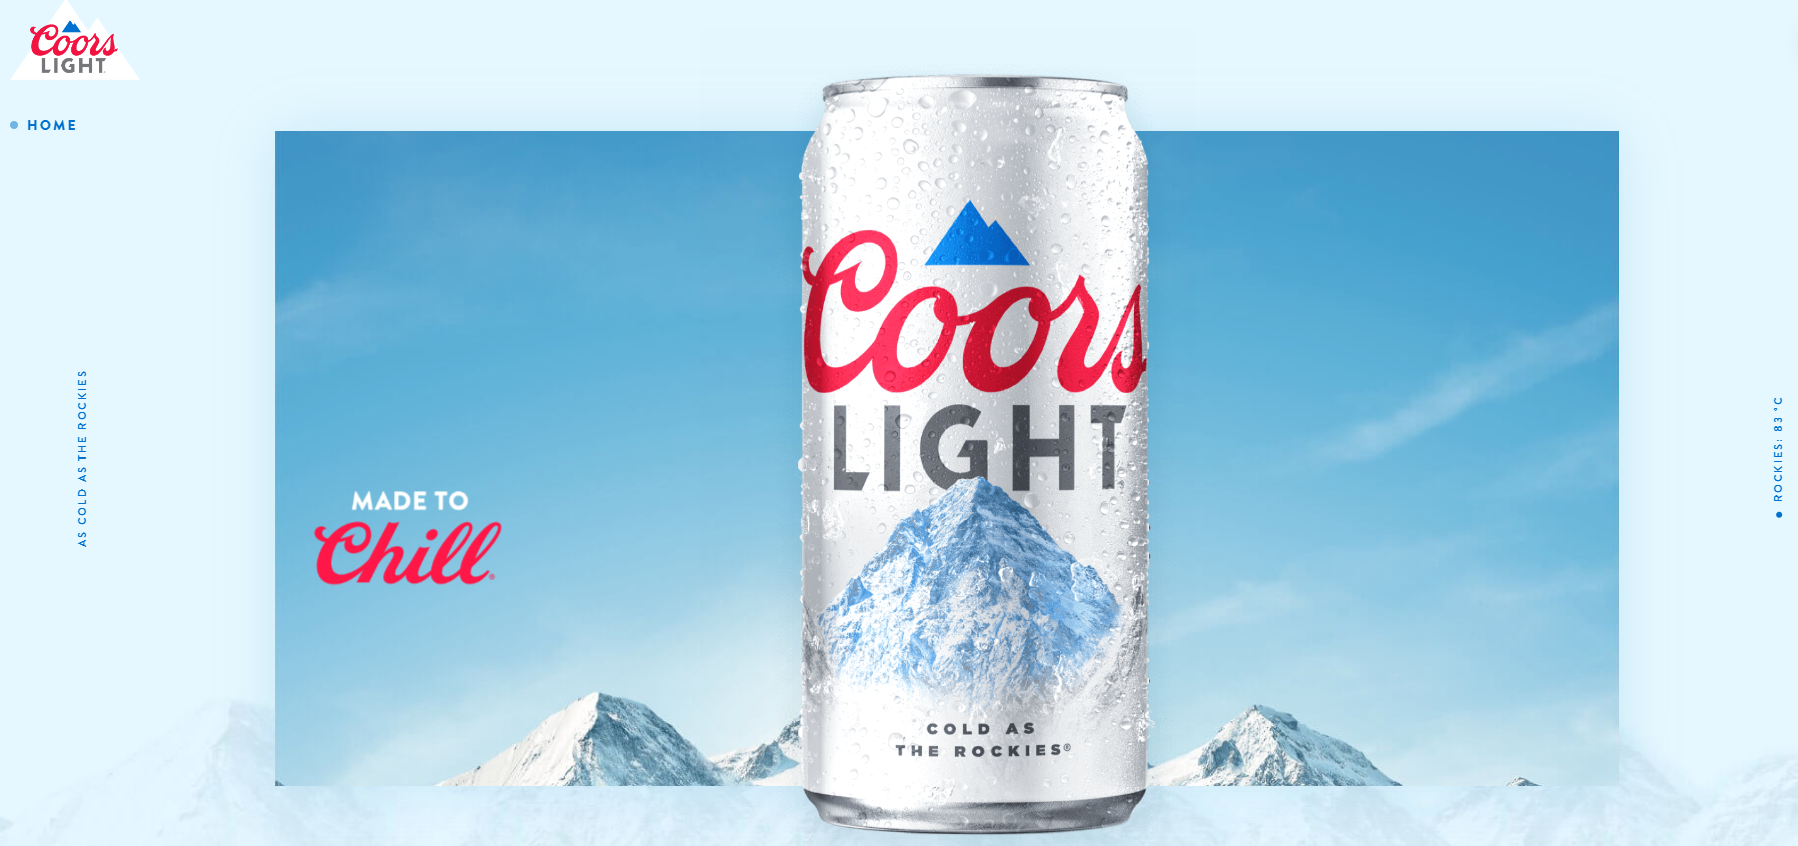 Coors Light claims their beer is as cold as the Rocky Mountains.